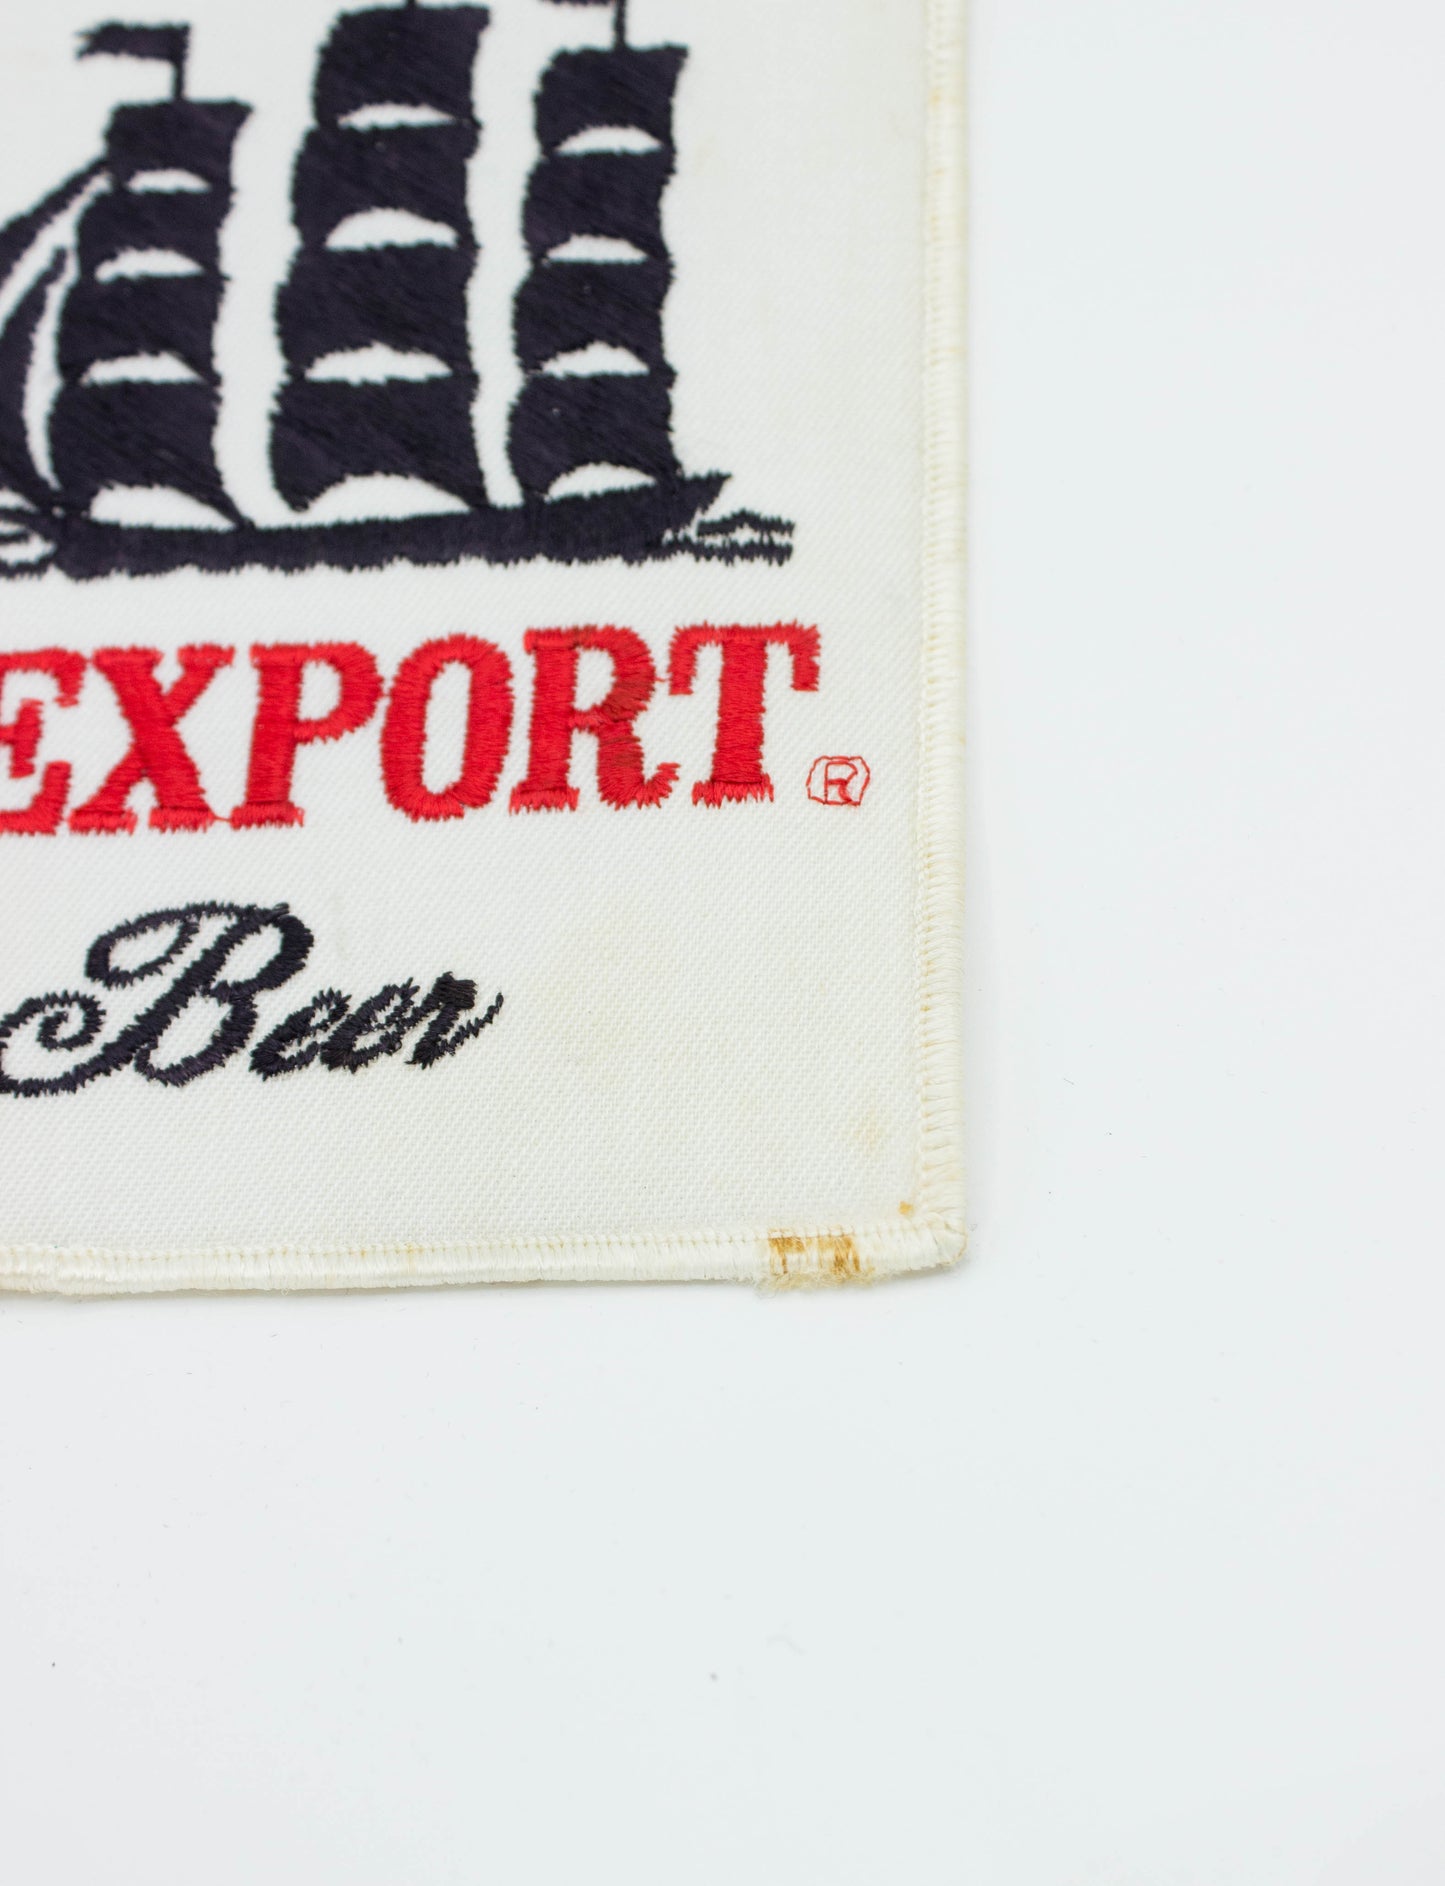 Vintage Heileman's Special Export Beer Large Square Patch 6.5x6.5